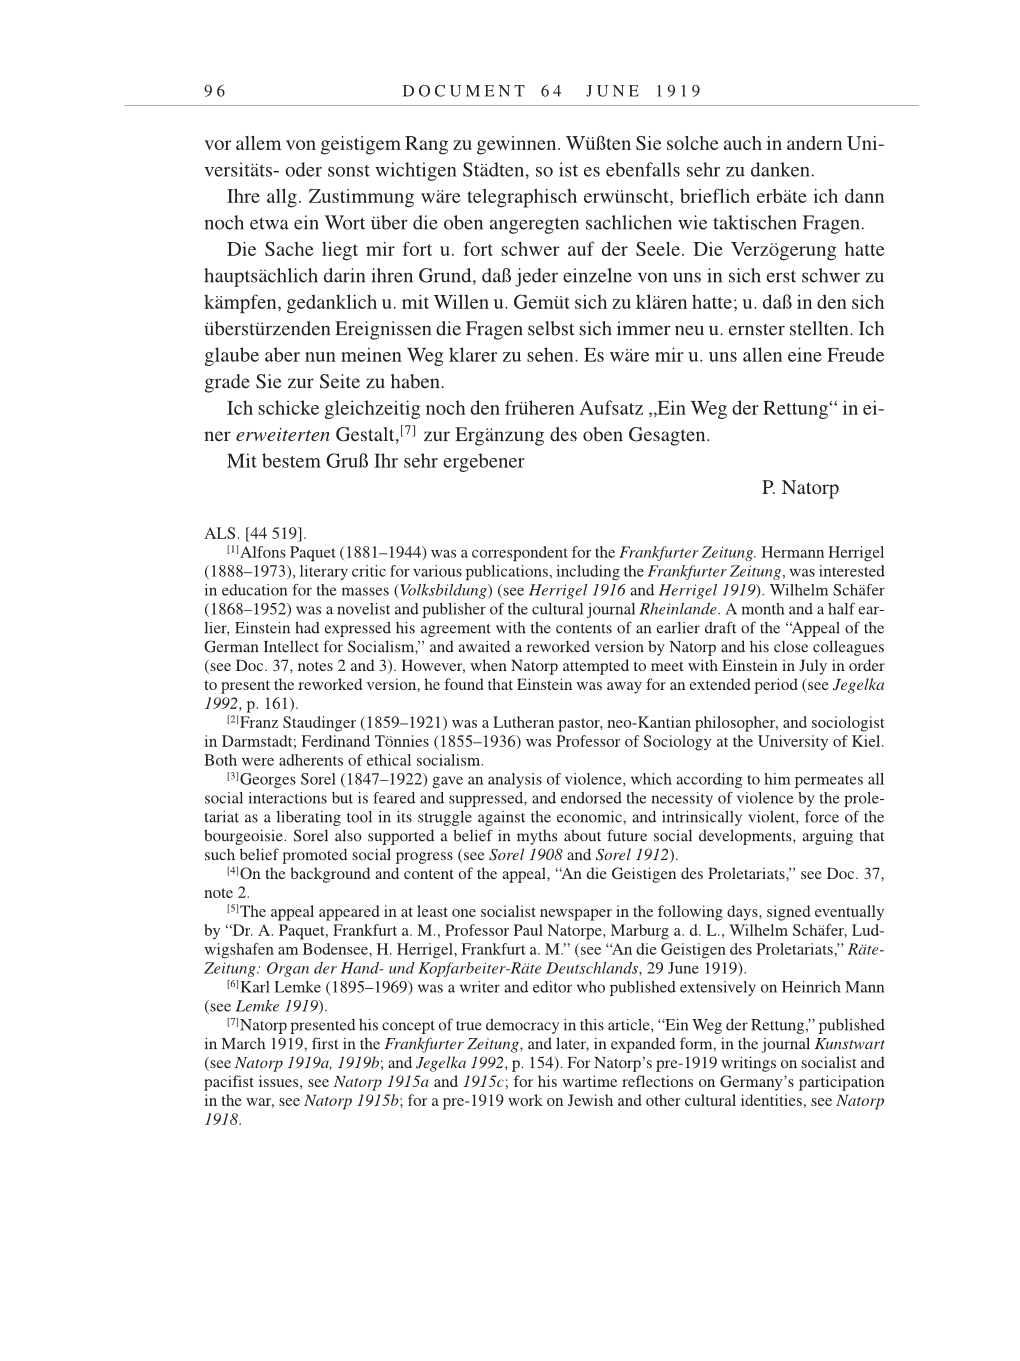 Volume 9: The Berlin Years: Correspondence January 1919-April 1920 page 96